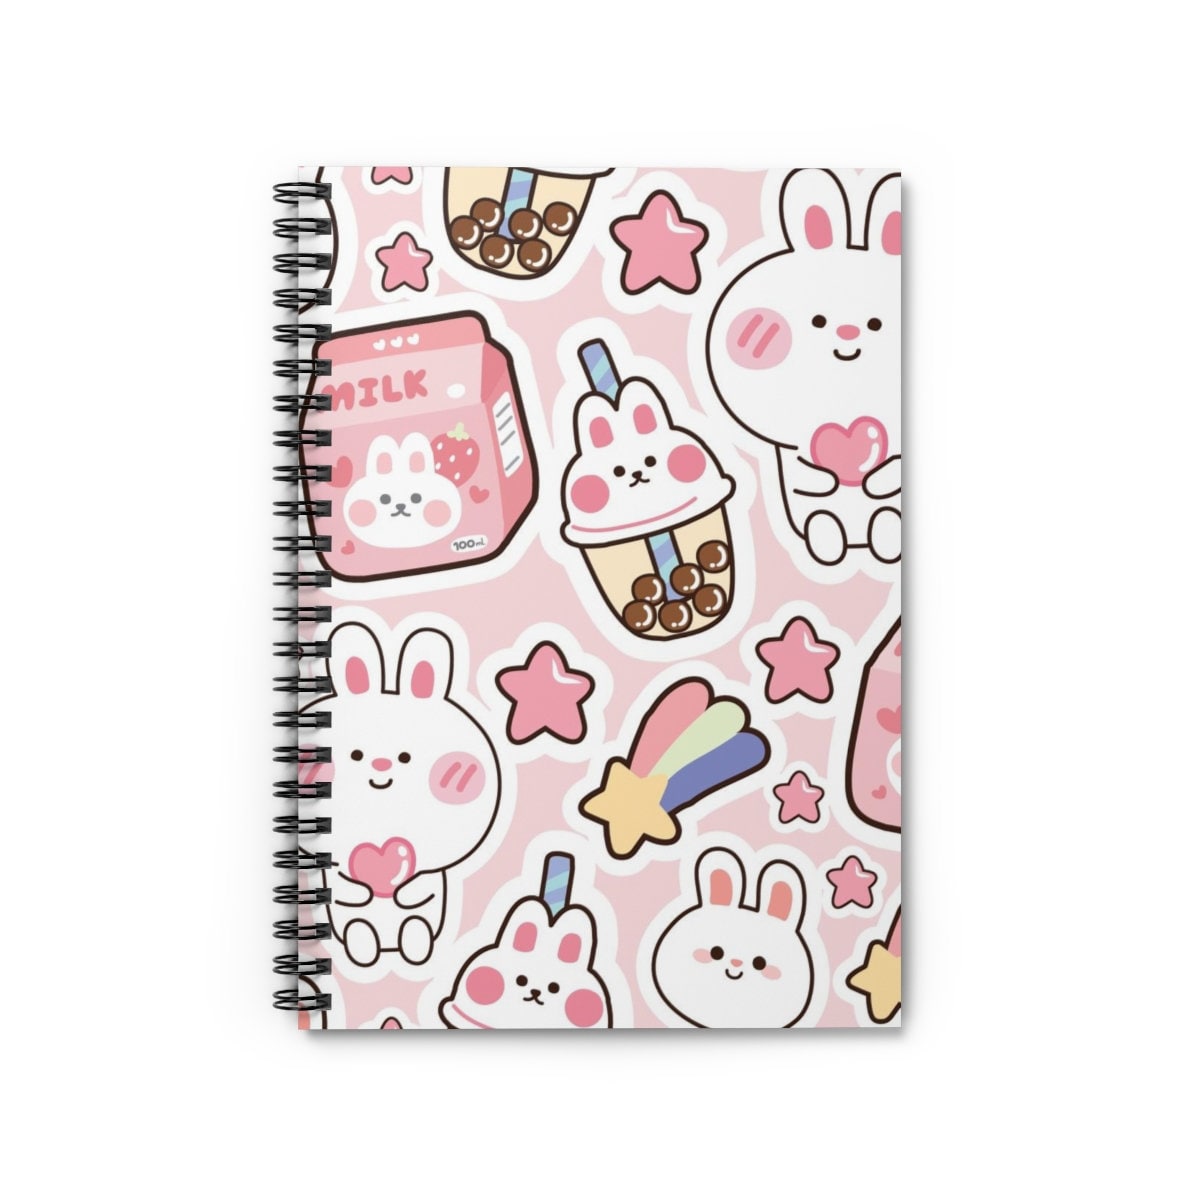 Doodle Art Notebook: Cute Kawaii Style Doodle Art Notebook Whimsical Rabbit  Pig, Sushi Pineapple Cat Octopus (Journal, Composition Book) Large